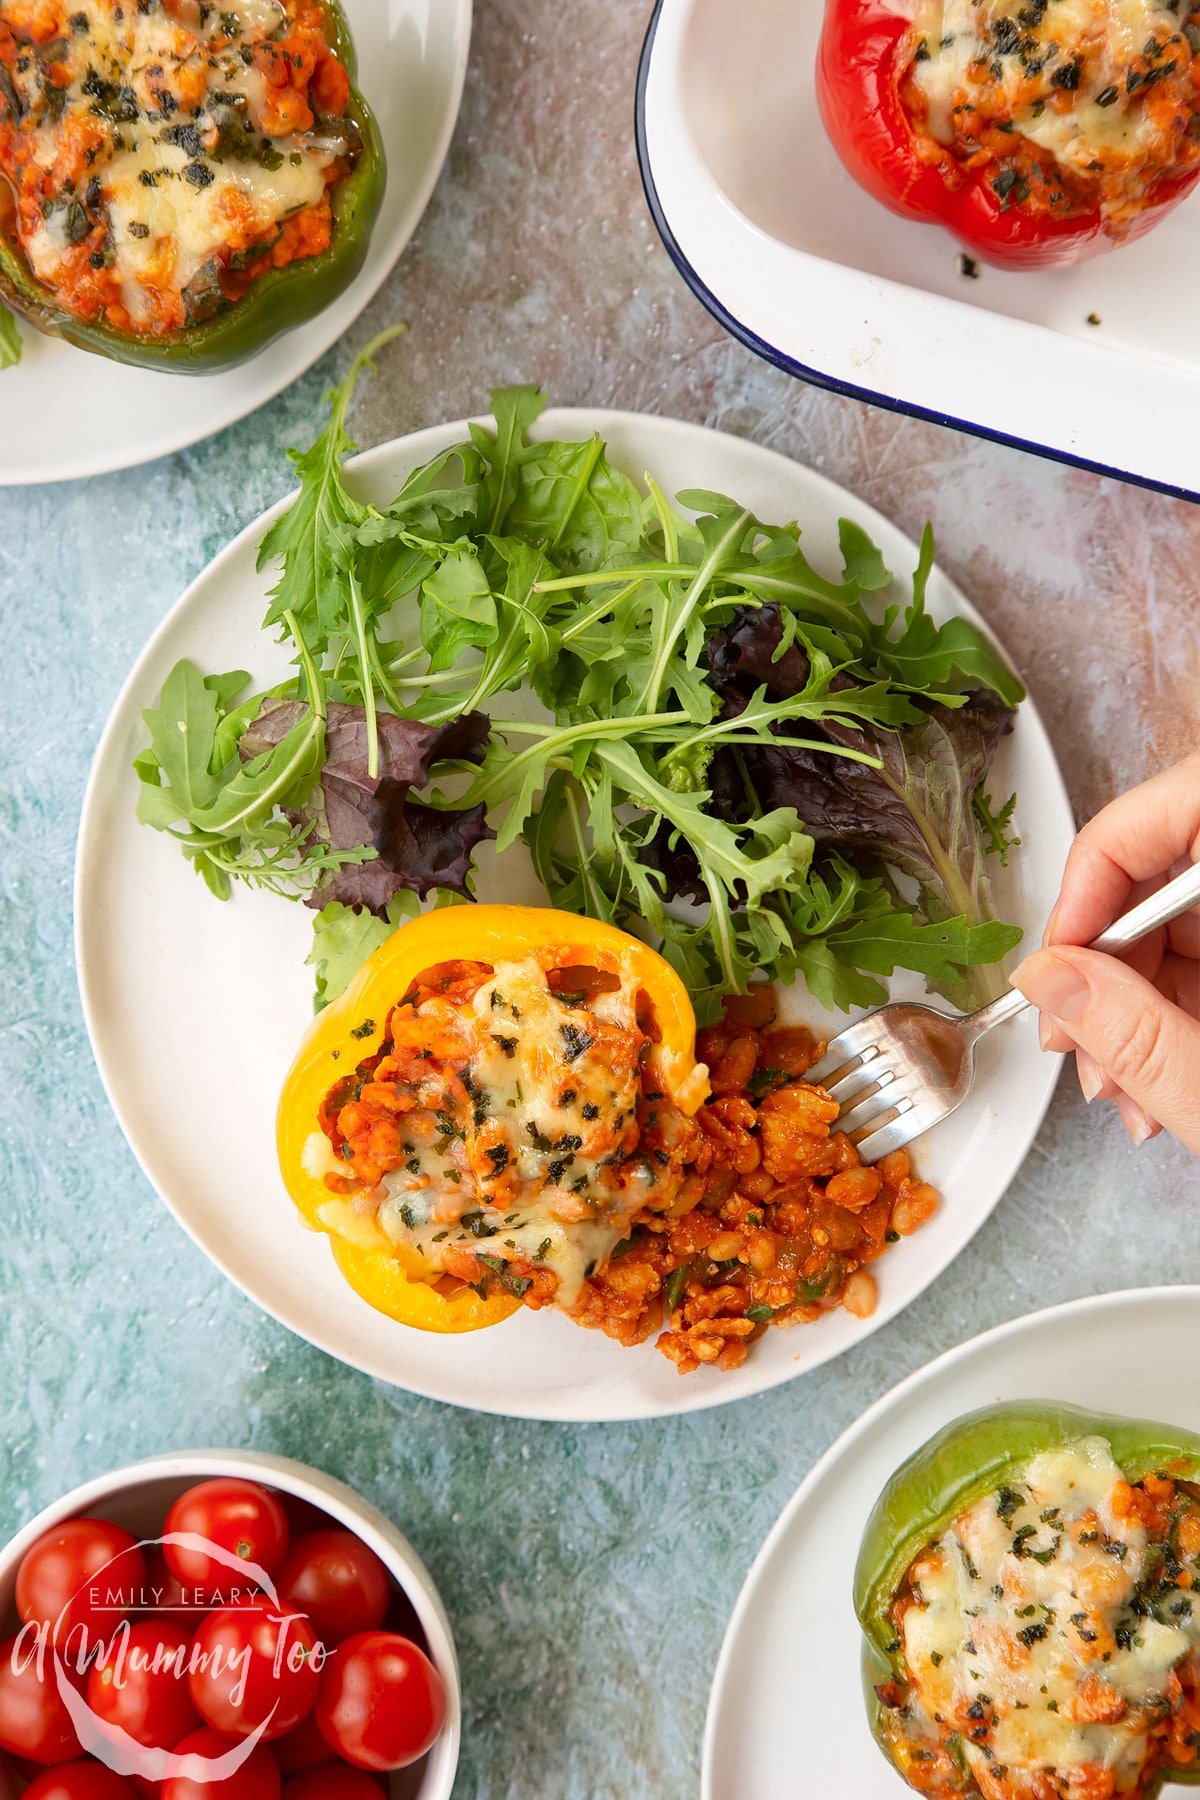 A yellow pepper stuffed with turkey mince, vegetables and baked beans with melted cheese on top. The filling spills onto the white plate and a fork delves into it. More baked bean stuffed peppers are shown to the edge of frame.